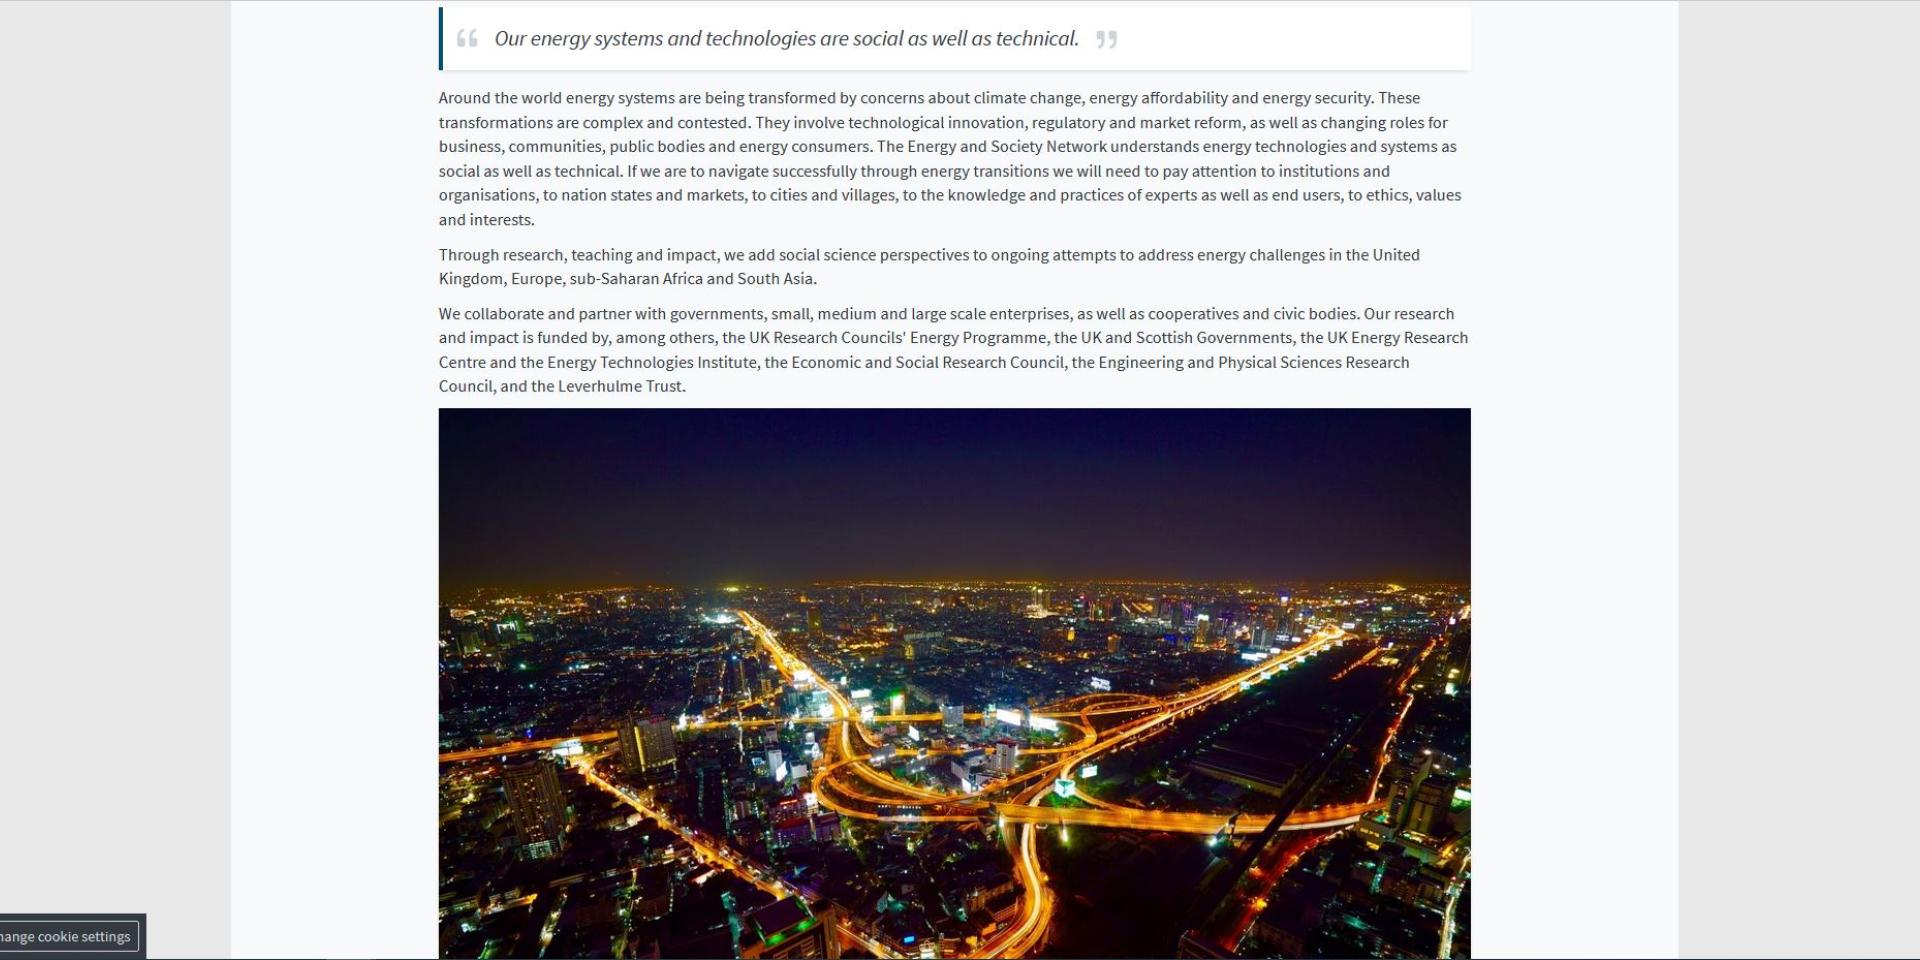 A screenshot of a generic content page with body text, a short block quote, and a photo of an illuminated city at night taken from above.